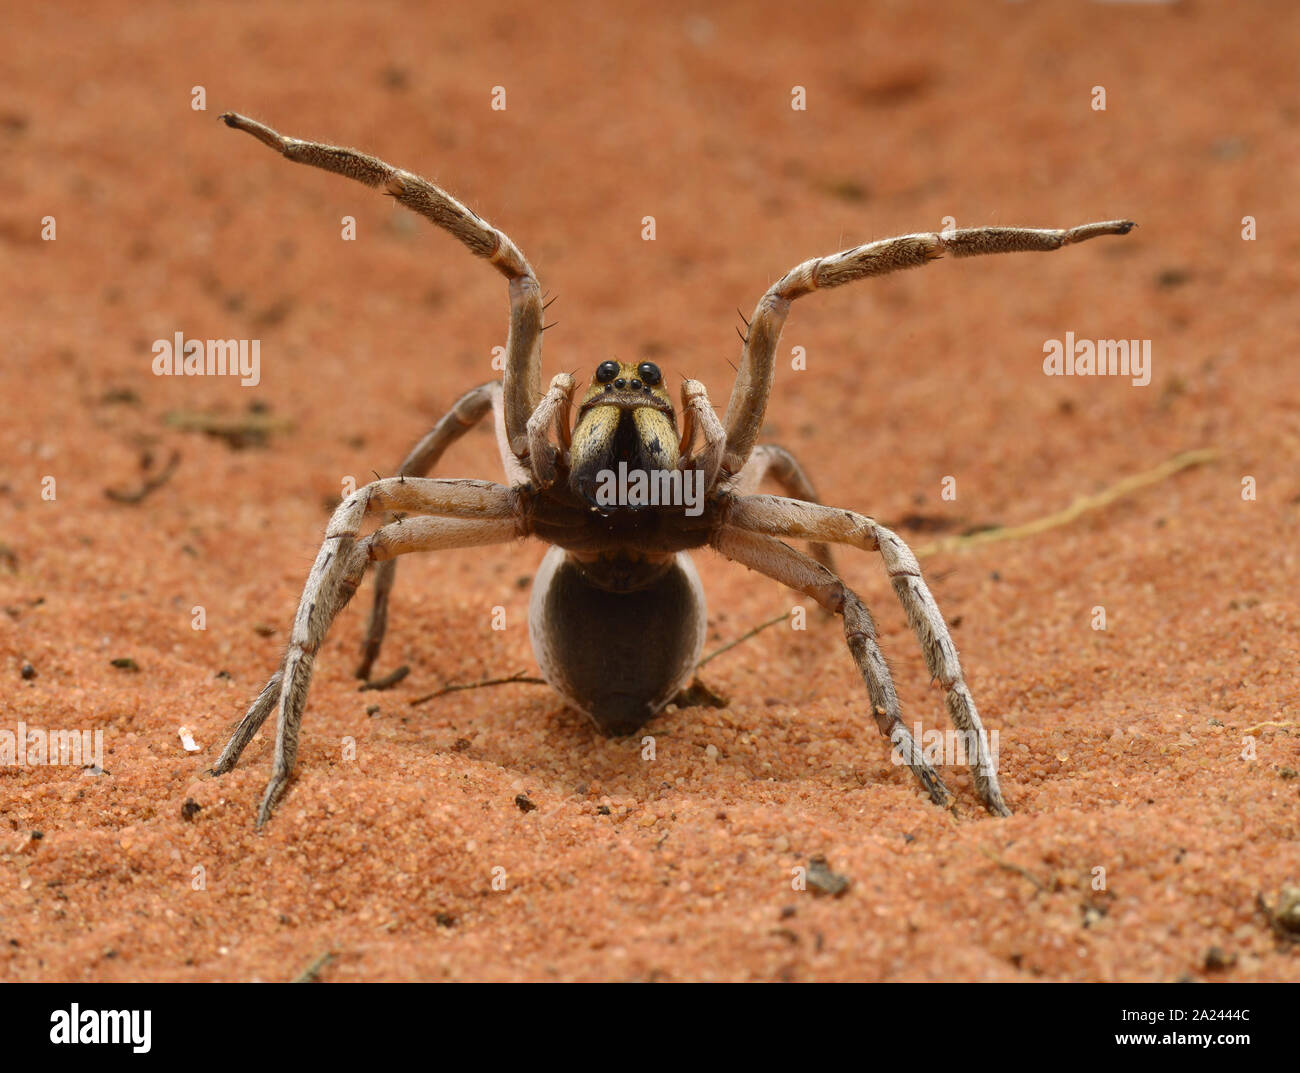 Wolf spider showing aggressive display Stock Photo